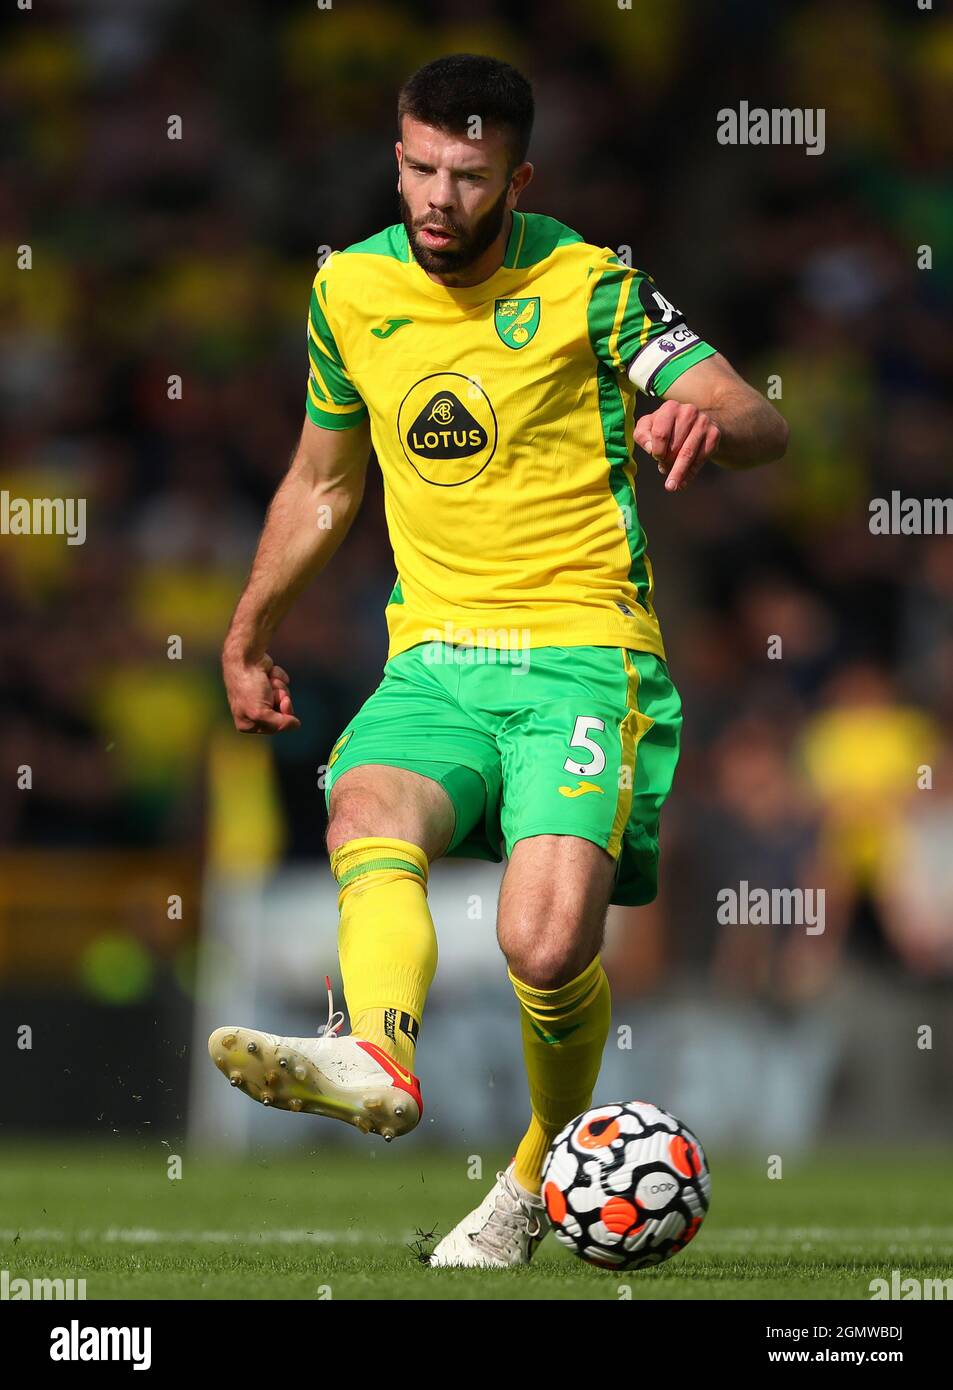 Grant Hanley of Norwich City - Norwich City v Watford, Premier League, Carrow Road, Norwich, UK - 18th September 2021  Editorial Use Only - DataCo restrictions apply Stock Photo